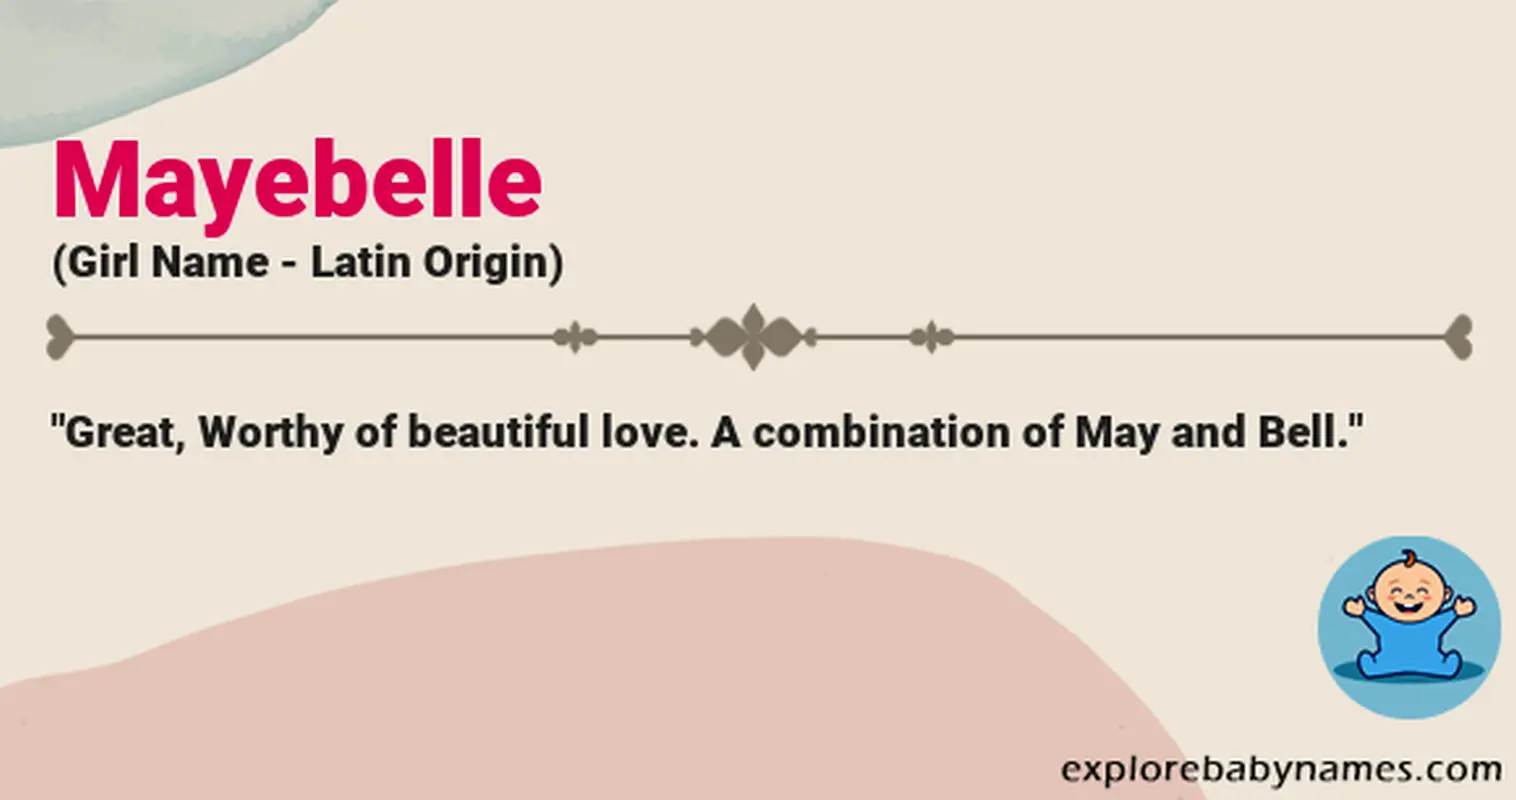 Meaning of Mayebelle